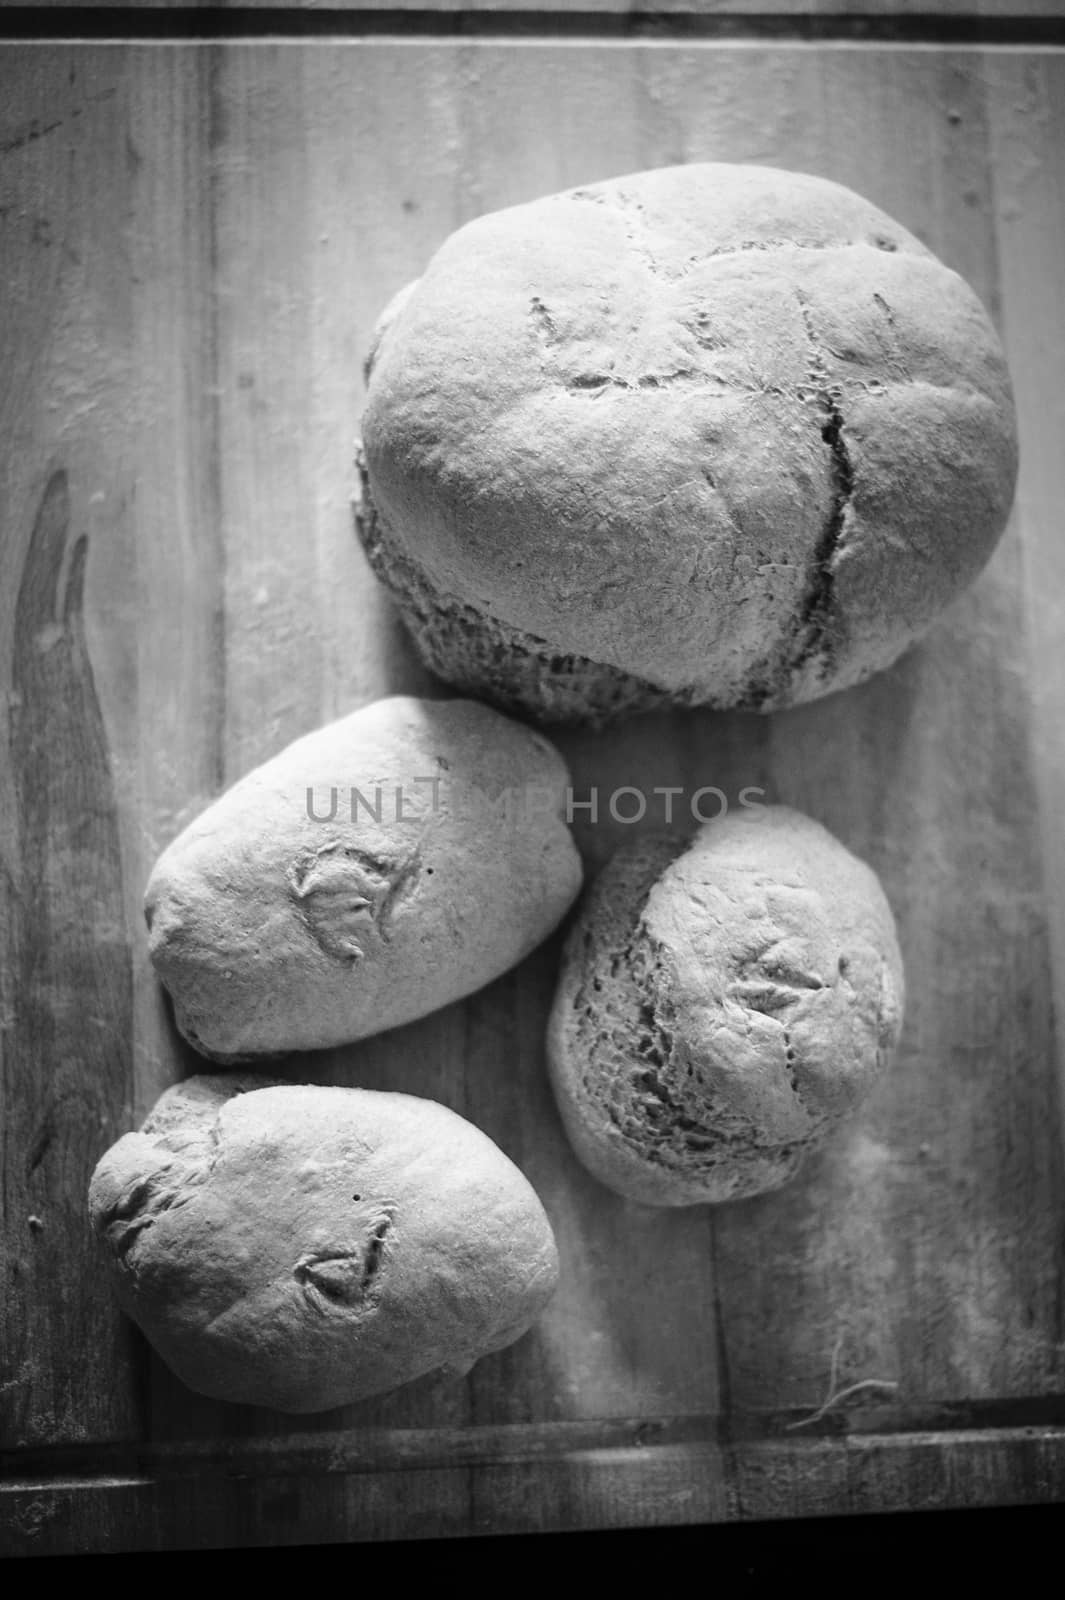 Homemade whole wheat bread with organic sourdough, wooden background